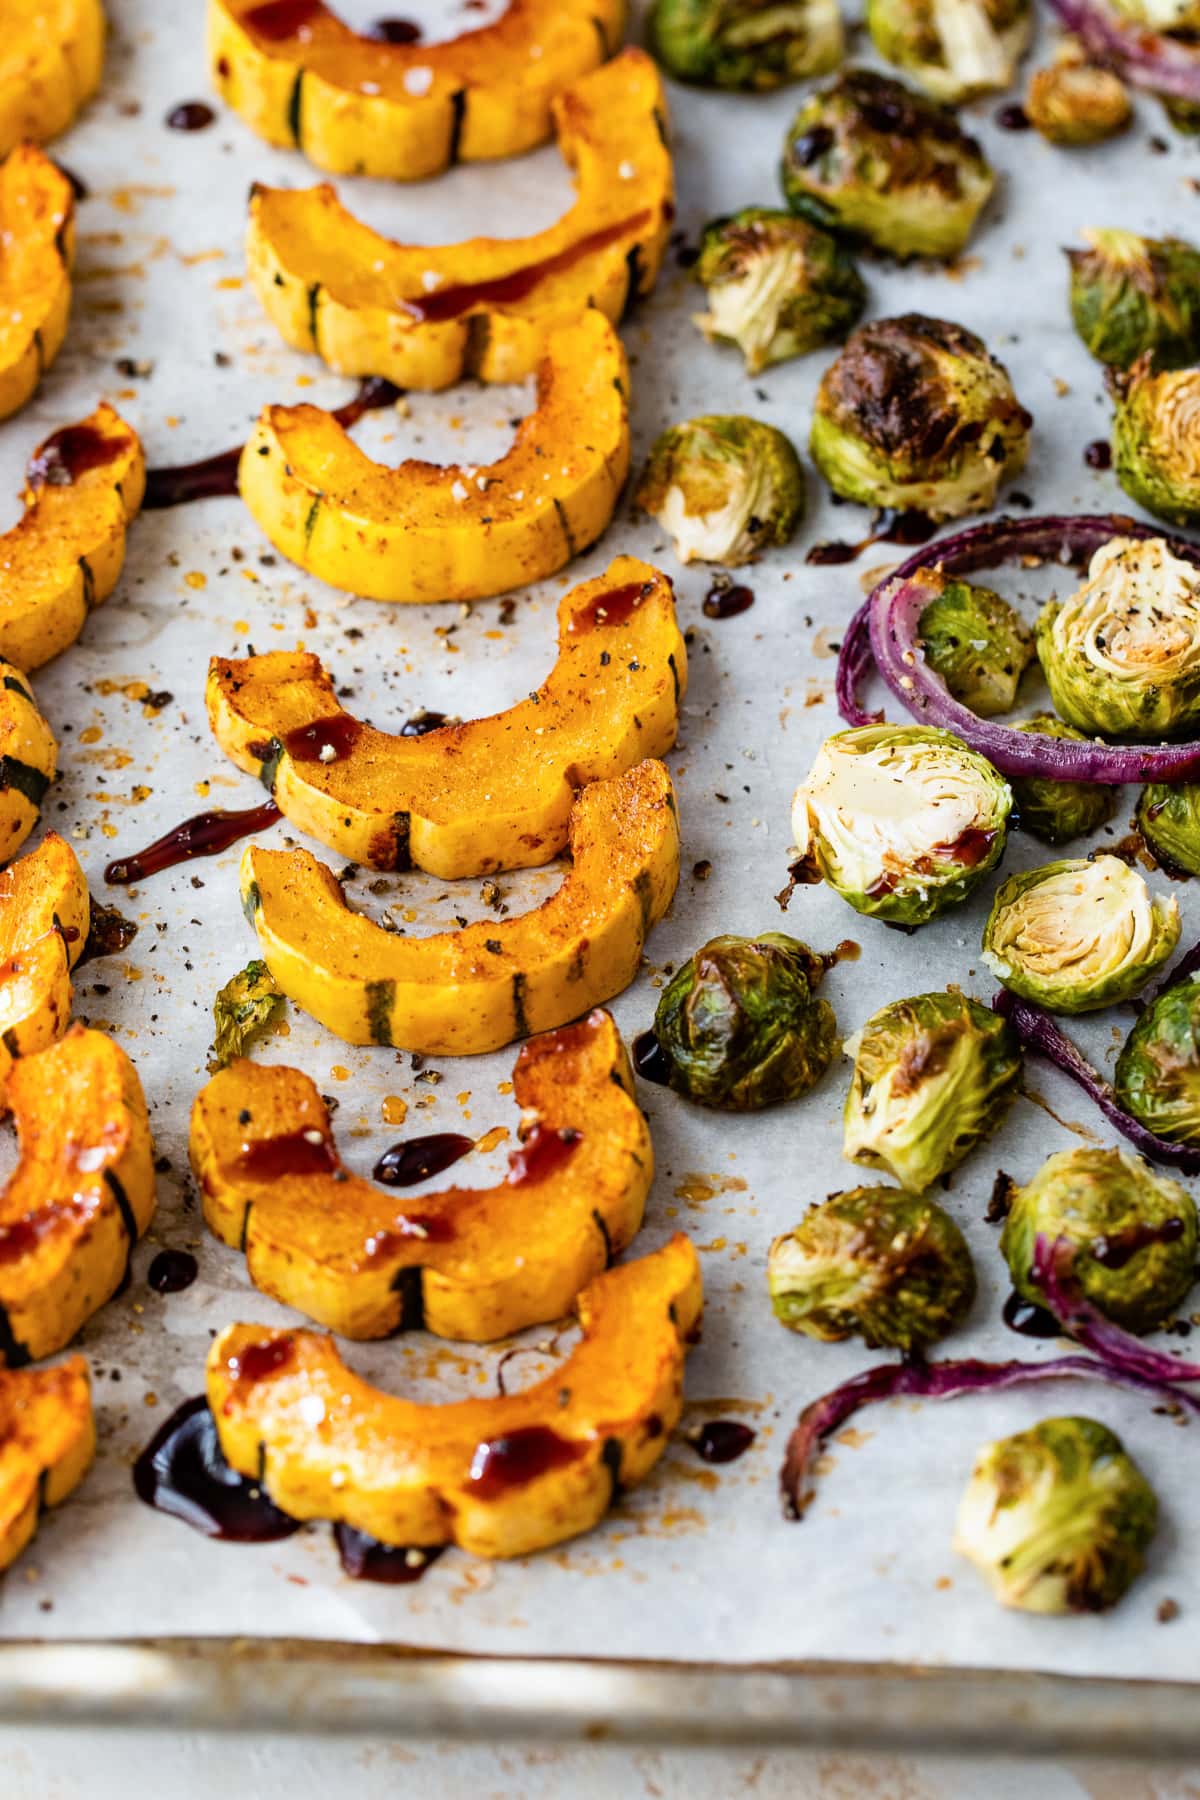 Delicata Squash and Brussels Sprouts